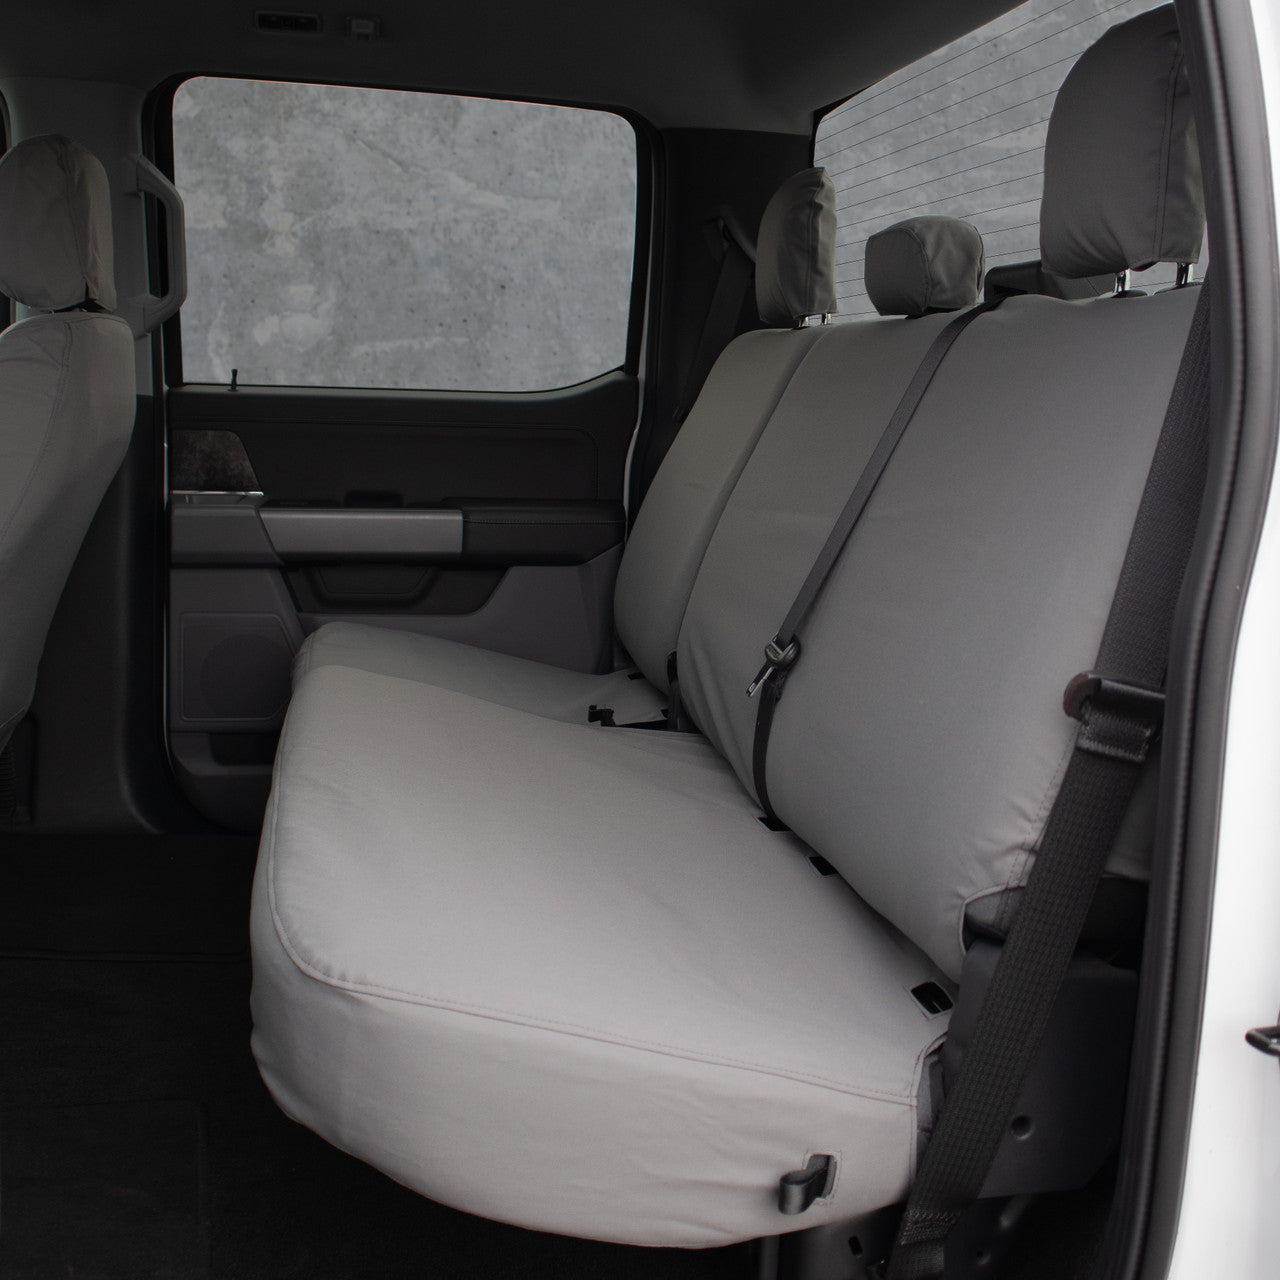 SuperCab Rear Seat Covers for Ford Trucks (55564)